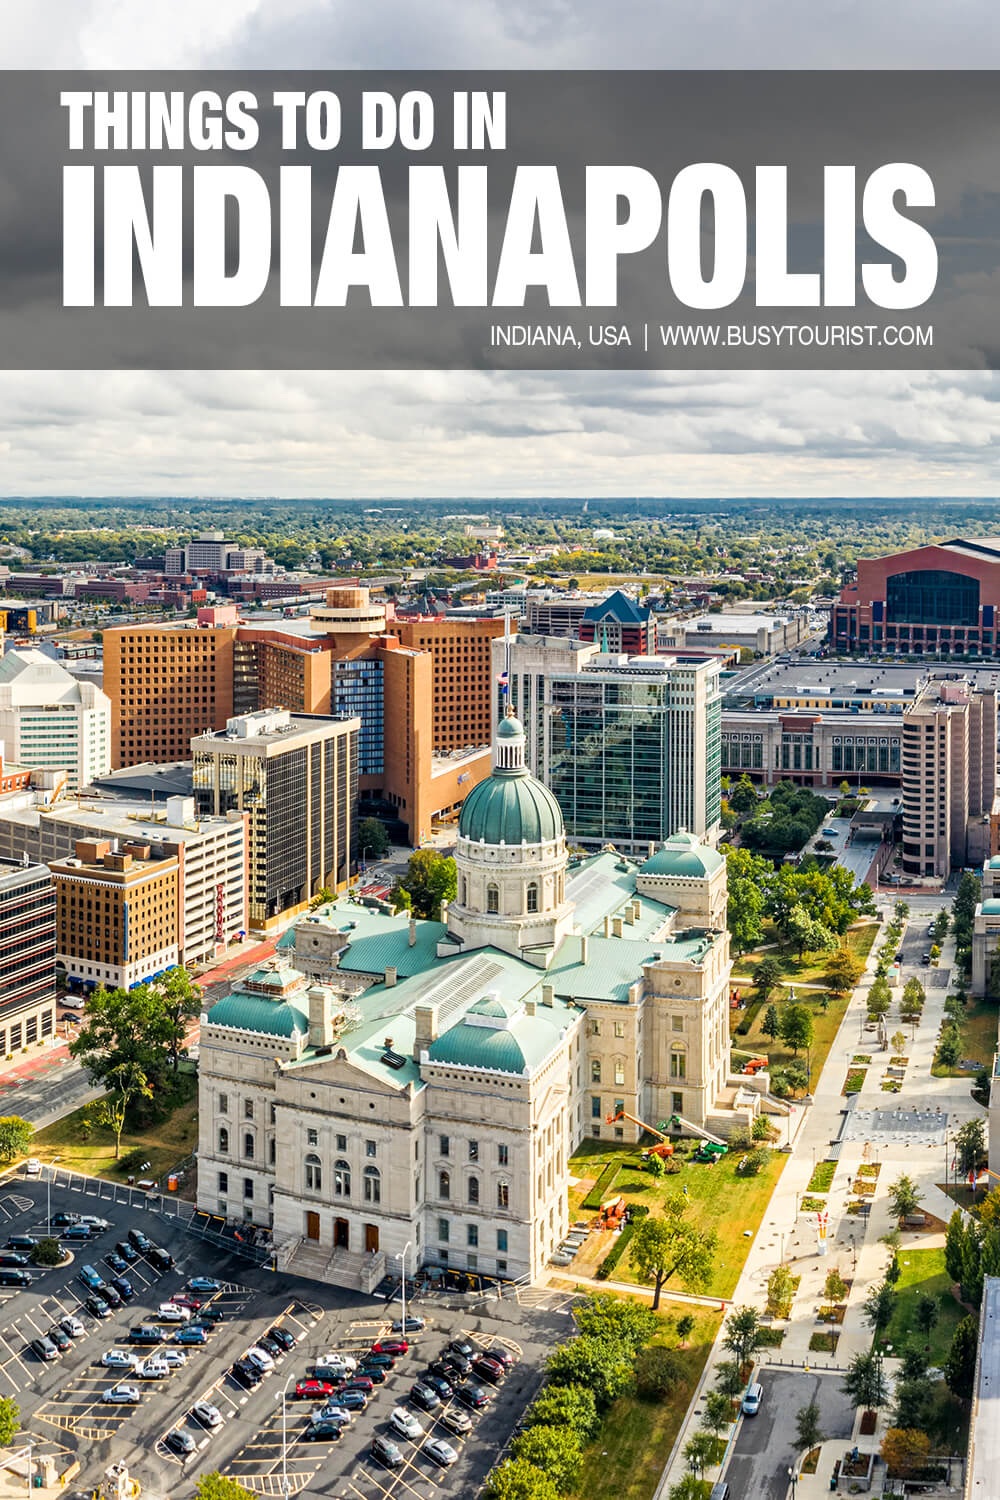 30 Fun Things To Do In Indianapolis (Indiana) Attractions & Activities